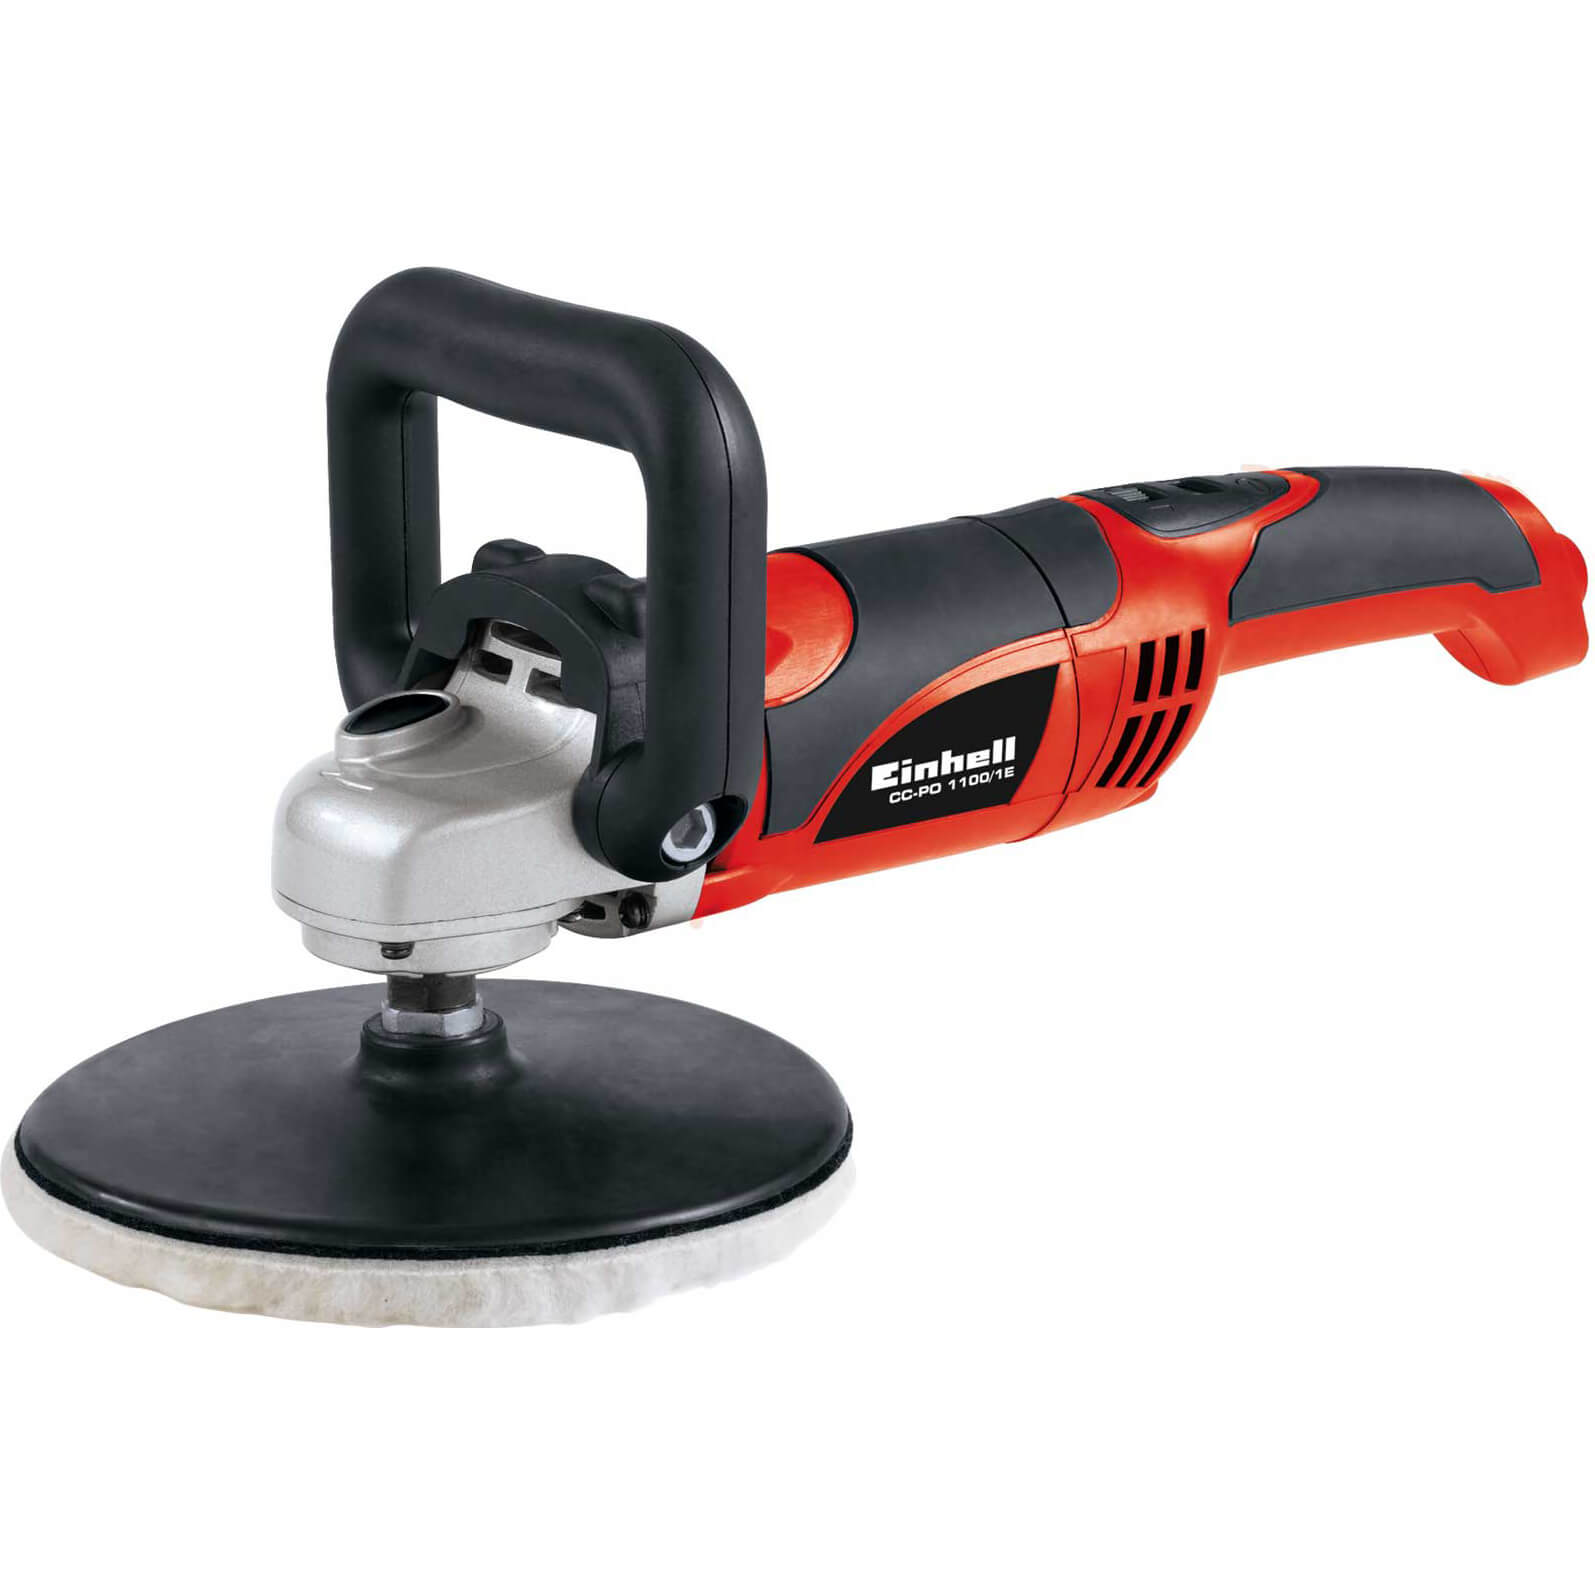 Photo of Einhell Cc-po 1100/1 E Disc Polisher And Sander 180mm